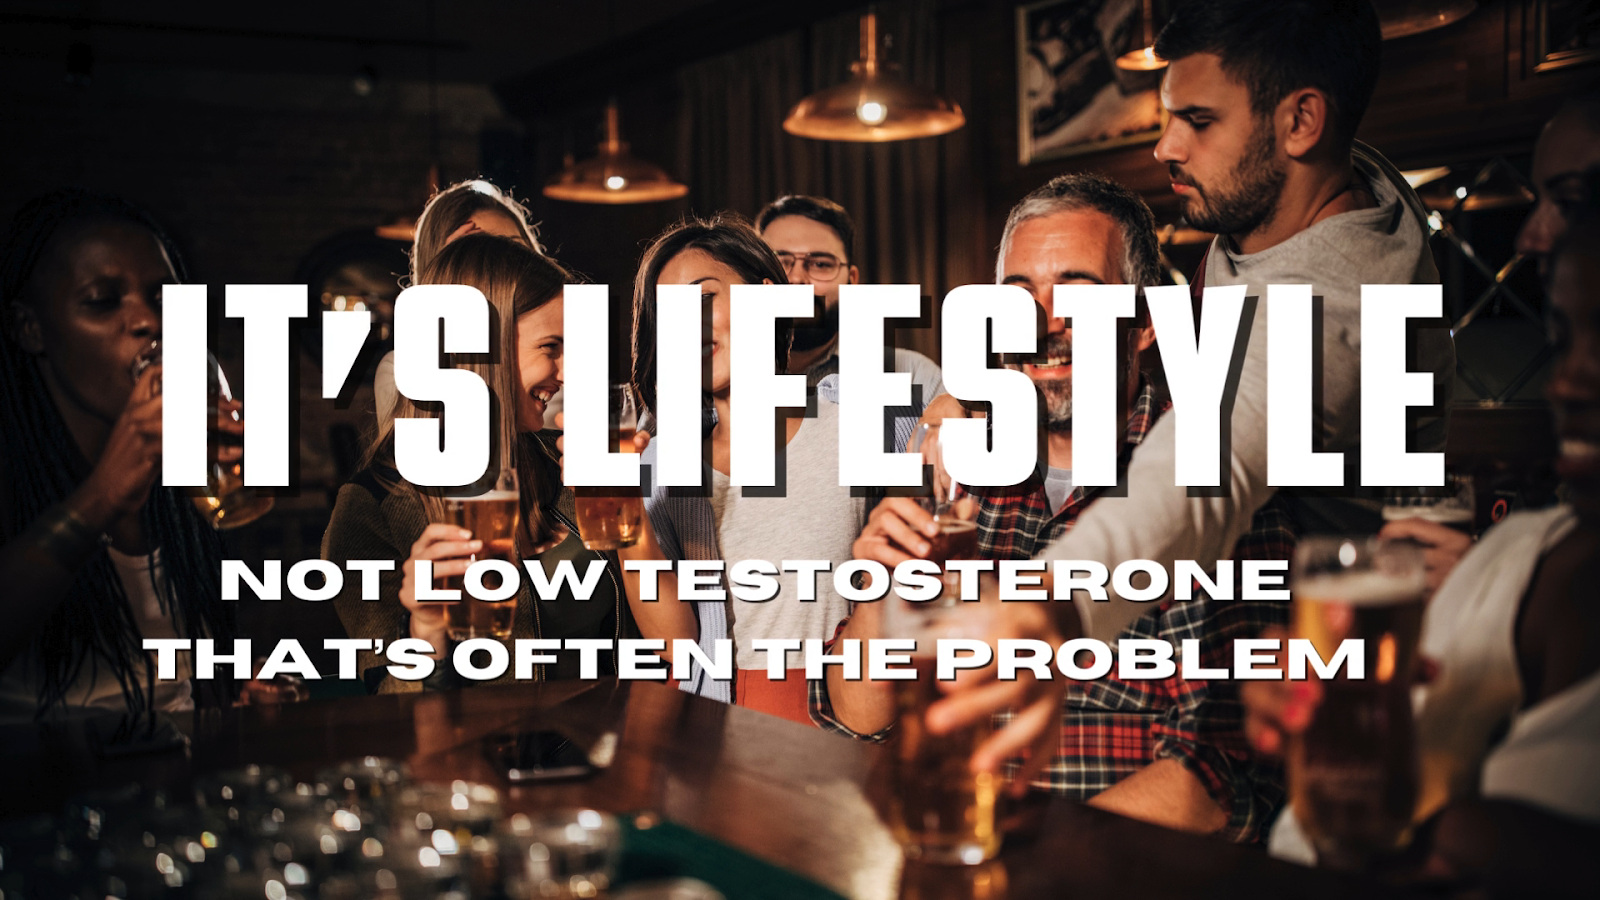 Lifestyle changes are often the solution to many problems attributed to low testosterone